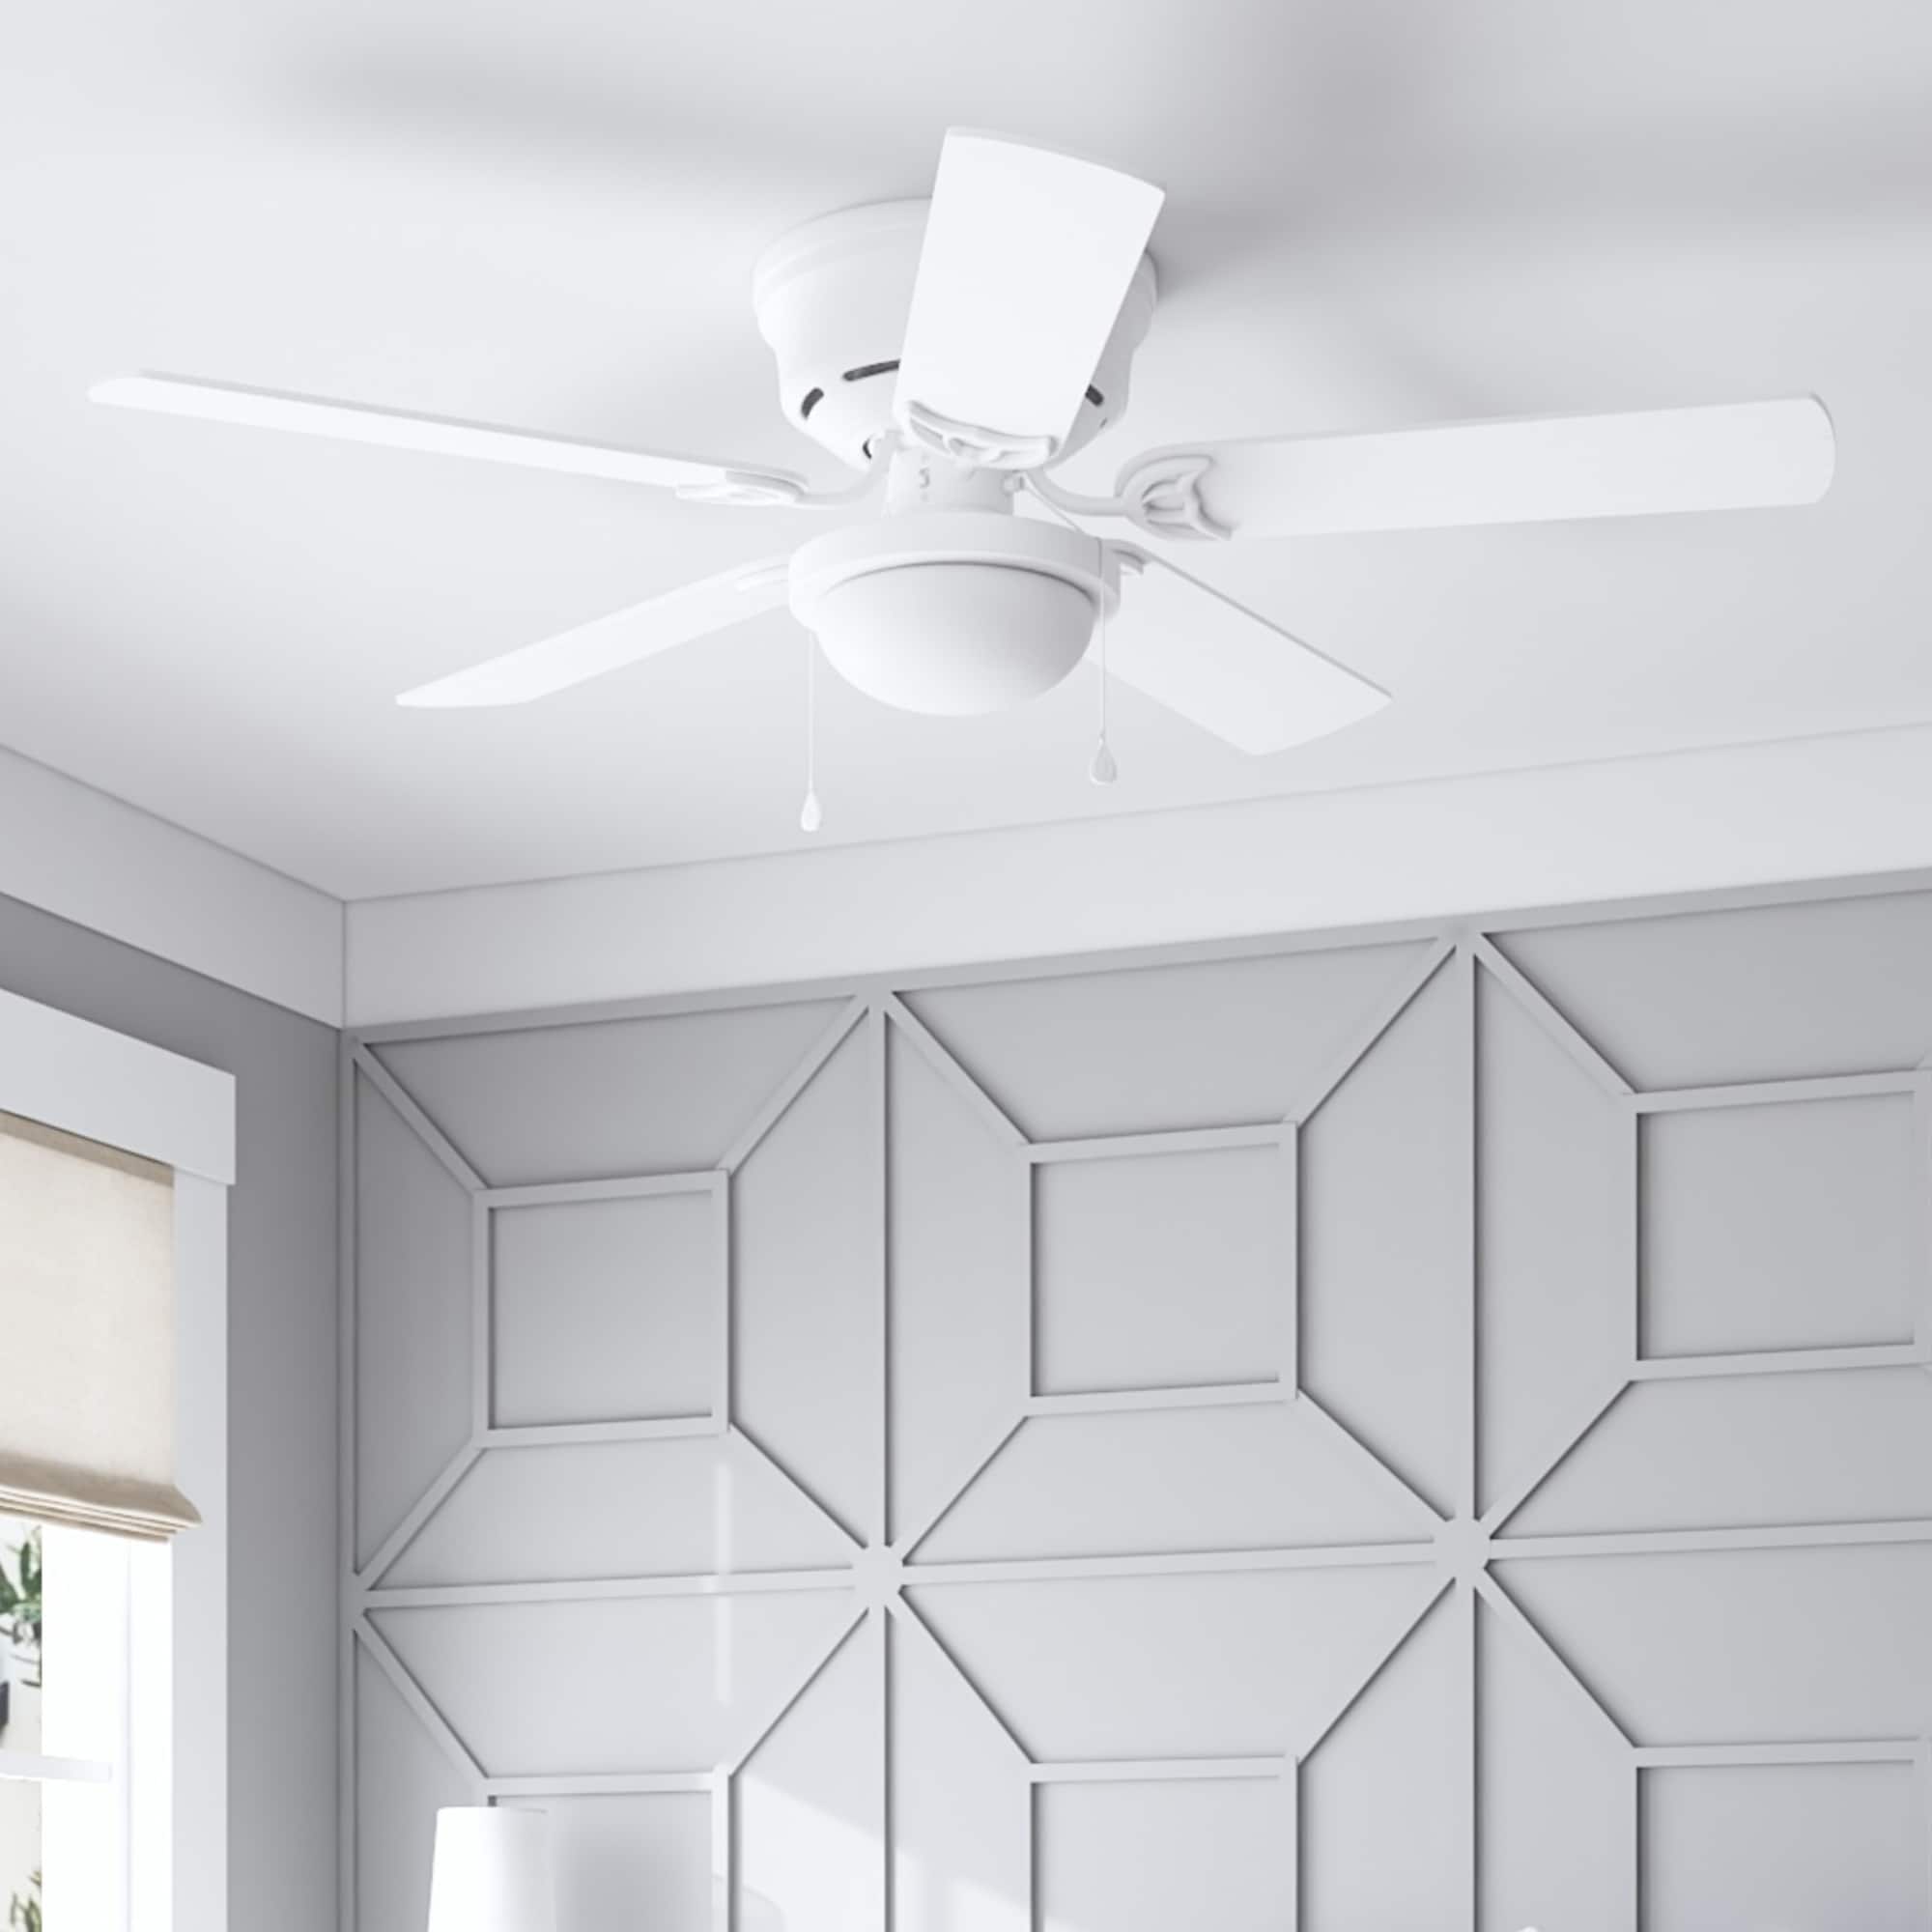 How to Buy a Ceiling Fan - A Four-Step Guide